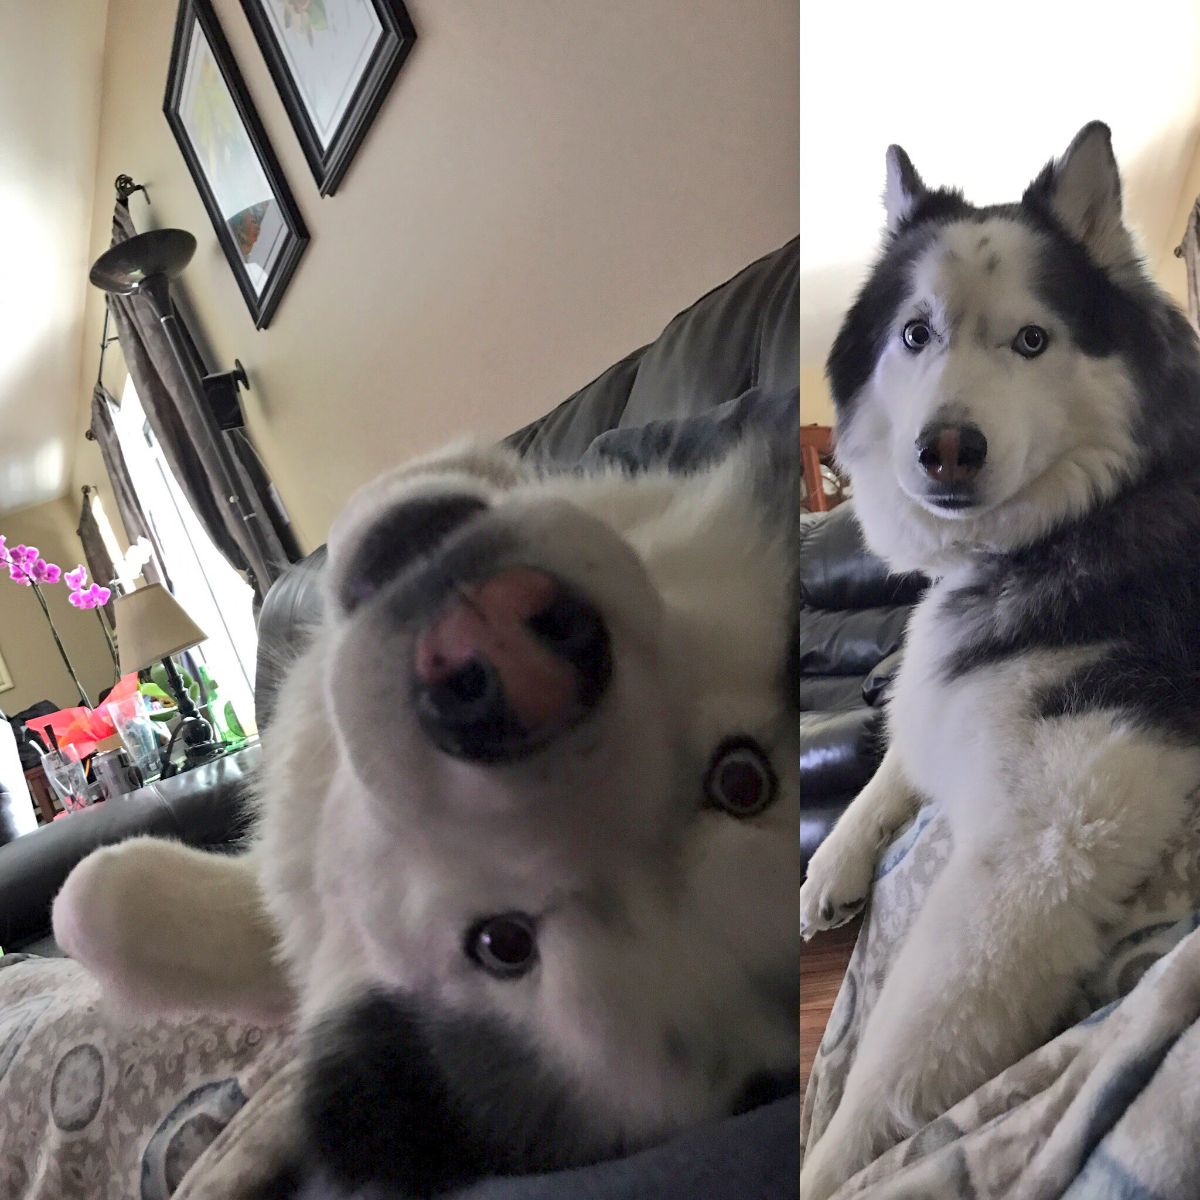 2 photos of a black and whtie husky being really close to their person